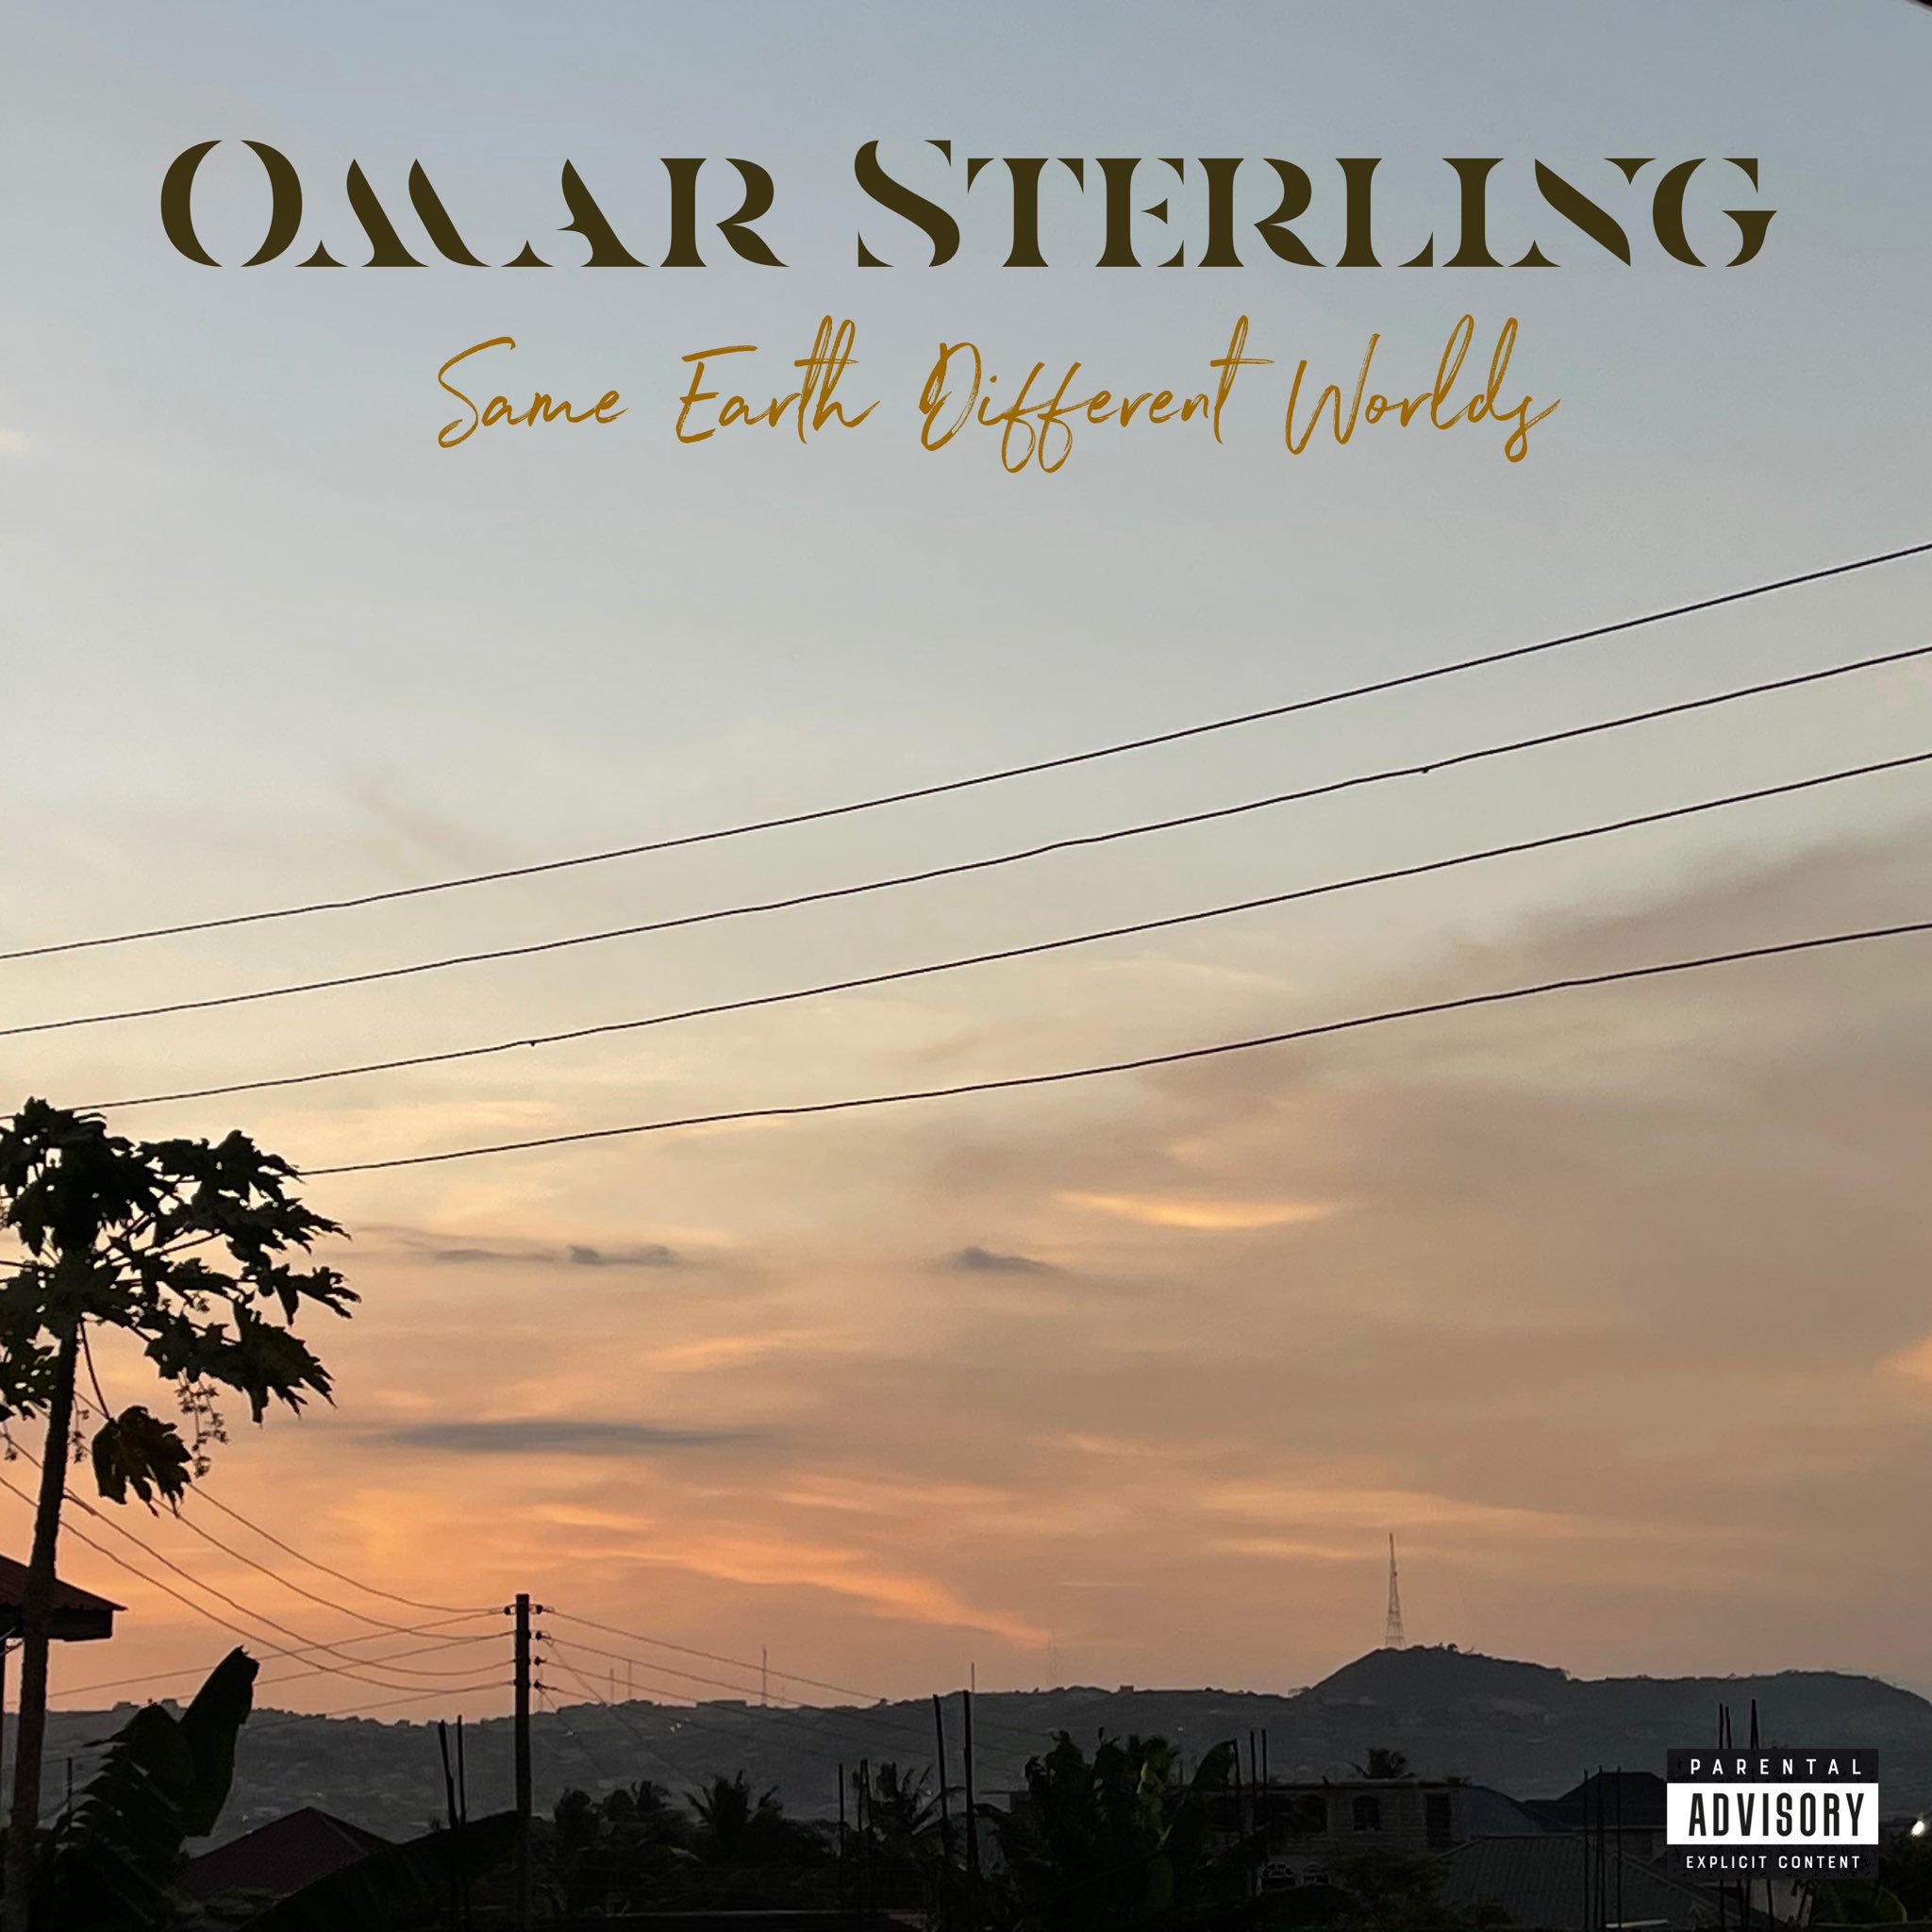 Omar Sterling – One Love Ft. Humble Dis